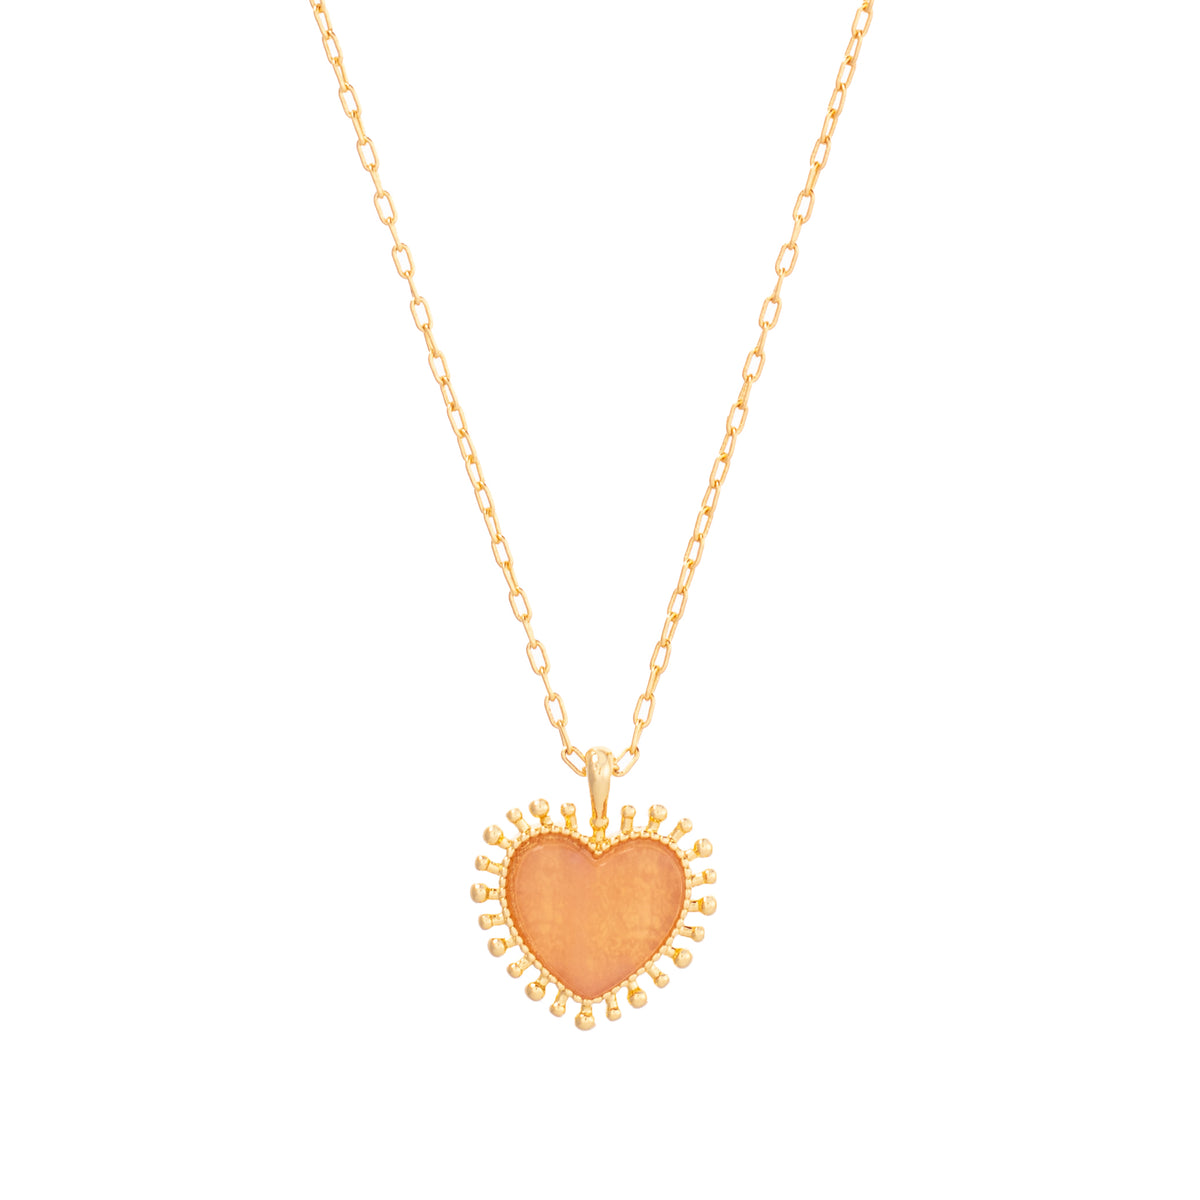 gold plated chain necklace with a heart pendant featuring the pink jade stone